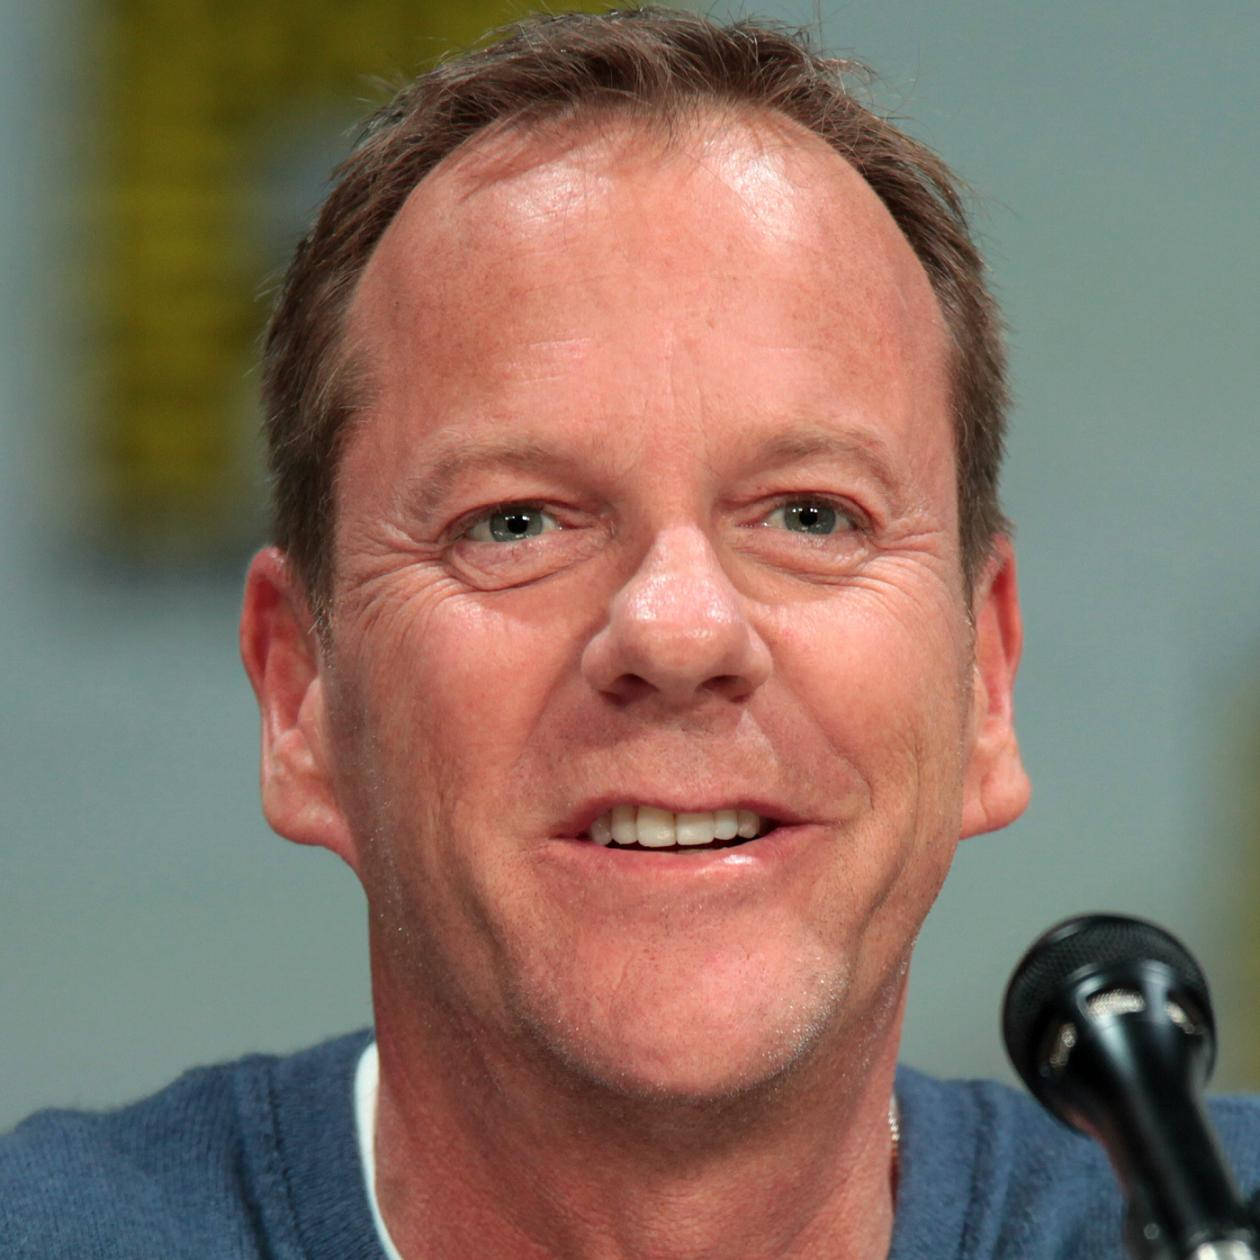 Kiefer Sutherland addressing at Comic Con press conference Wallpaper